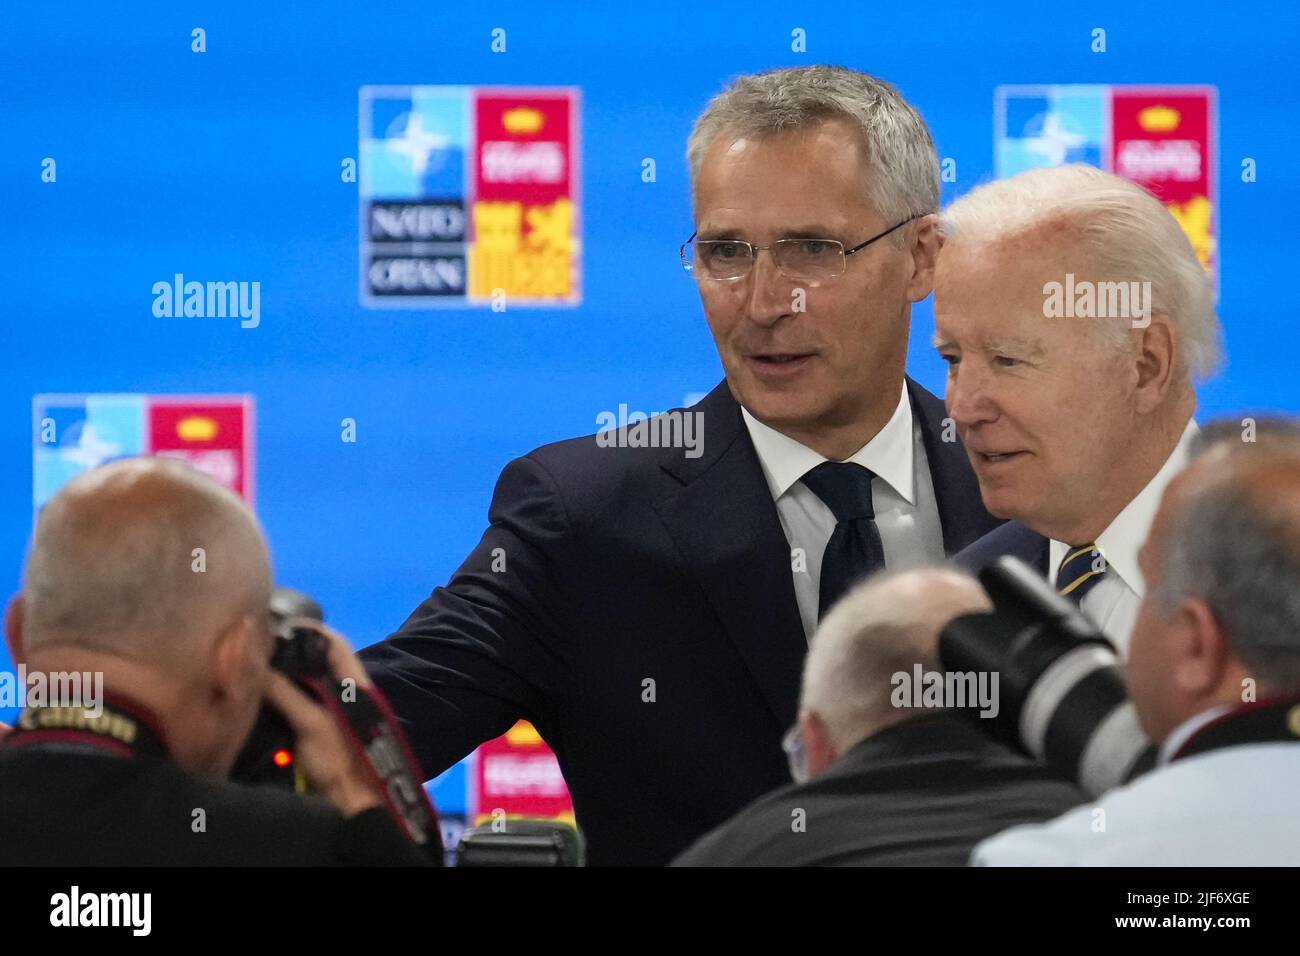 Madrid, Spain. 30th June, 2022. President Joe Biden and NATO Secretary General Jens Stoltenberg attend a NATO heads of state and governments meeting on the final day of a NATO summit in Madrid, Spain, Thursday, June 30, 2022. Photo by Paul Hanna/UPI Credit: UPI/Alamy Live News Stock Photo